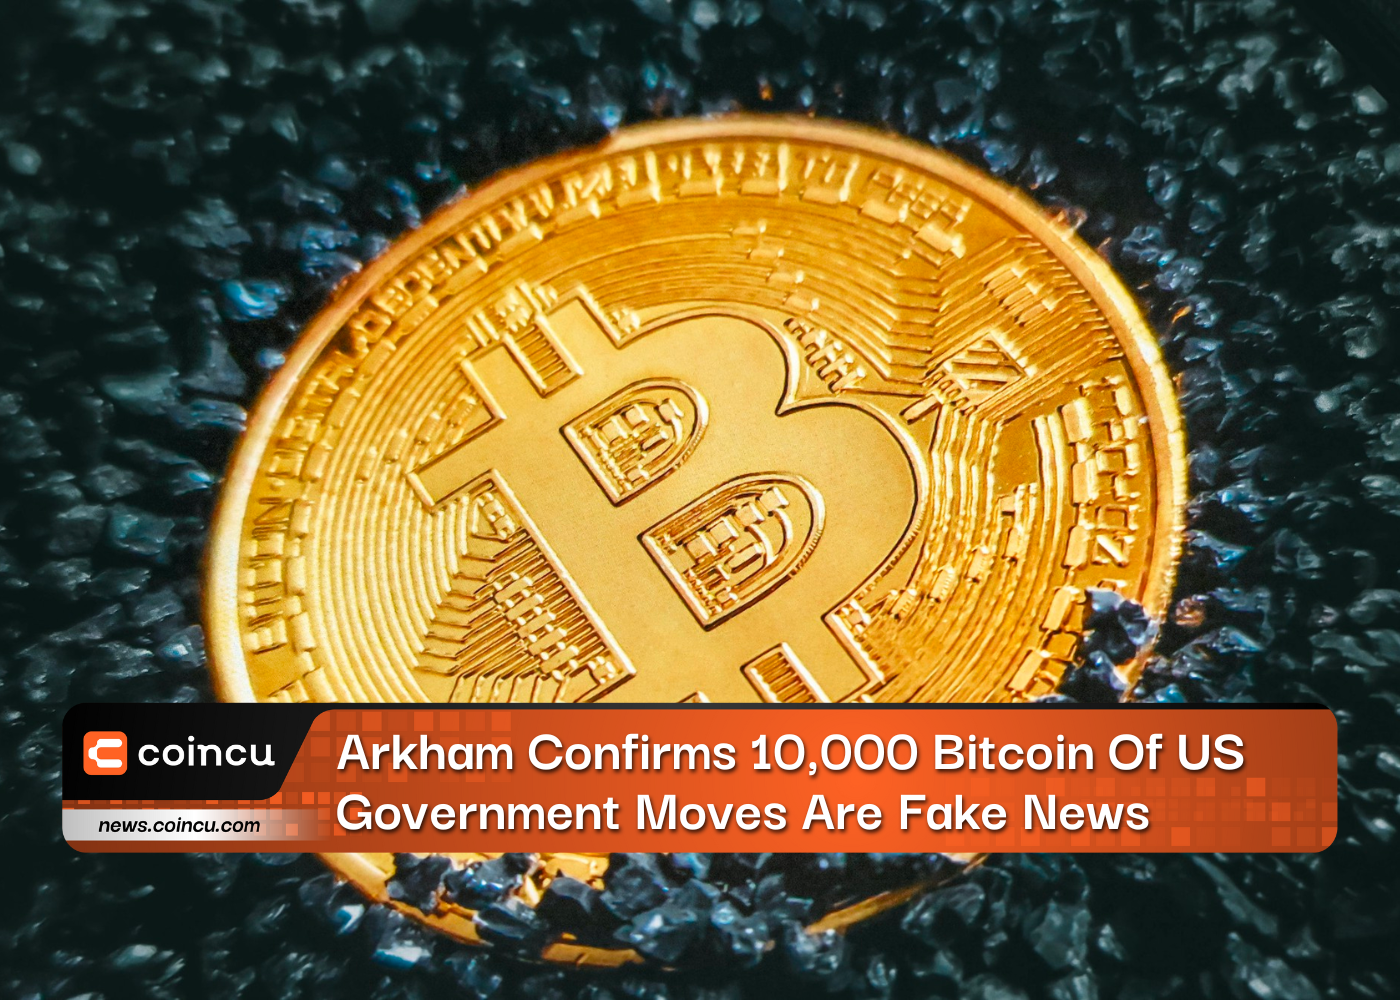 Arkham Confirms 10,000 Bitcoin Of US Government Moves Are Fake News